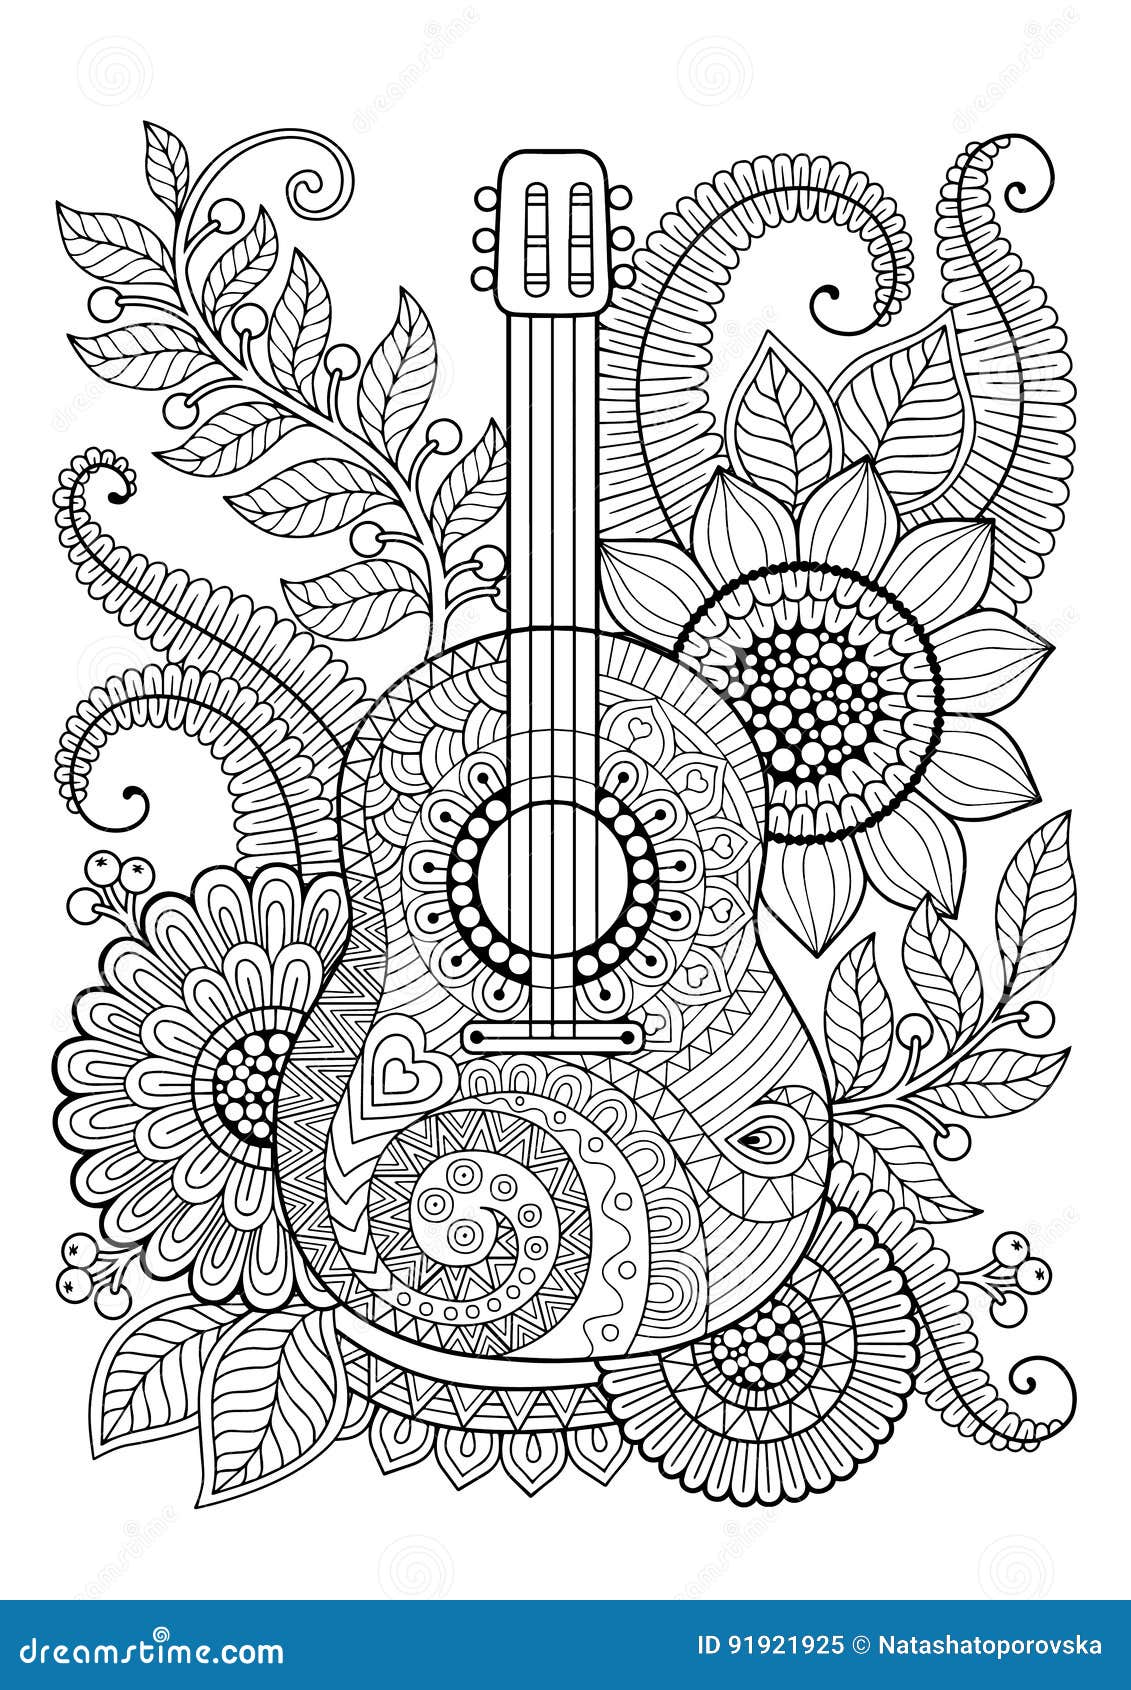 Azulejo Coloring Book for Kids: For Boys and Girls Ages 8-12 - 45 Azulejos for Coloring - Gift Book to Relax and Promote Creativity - Incl. PDF Templates [Book]